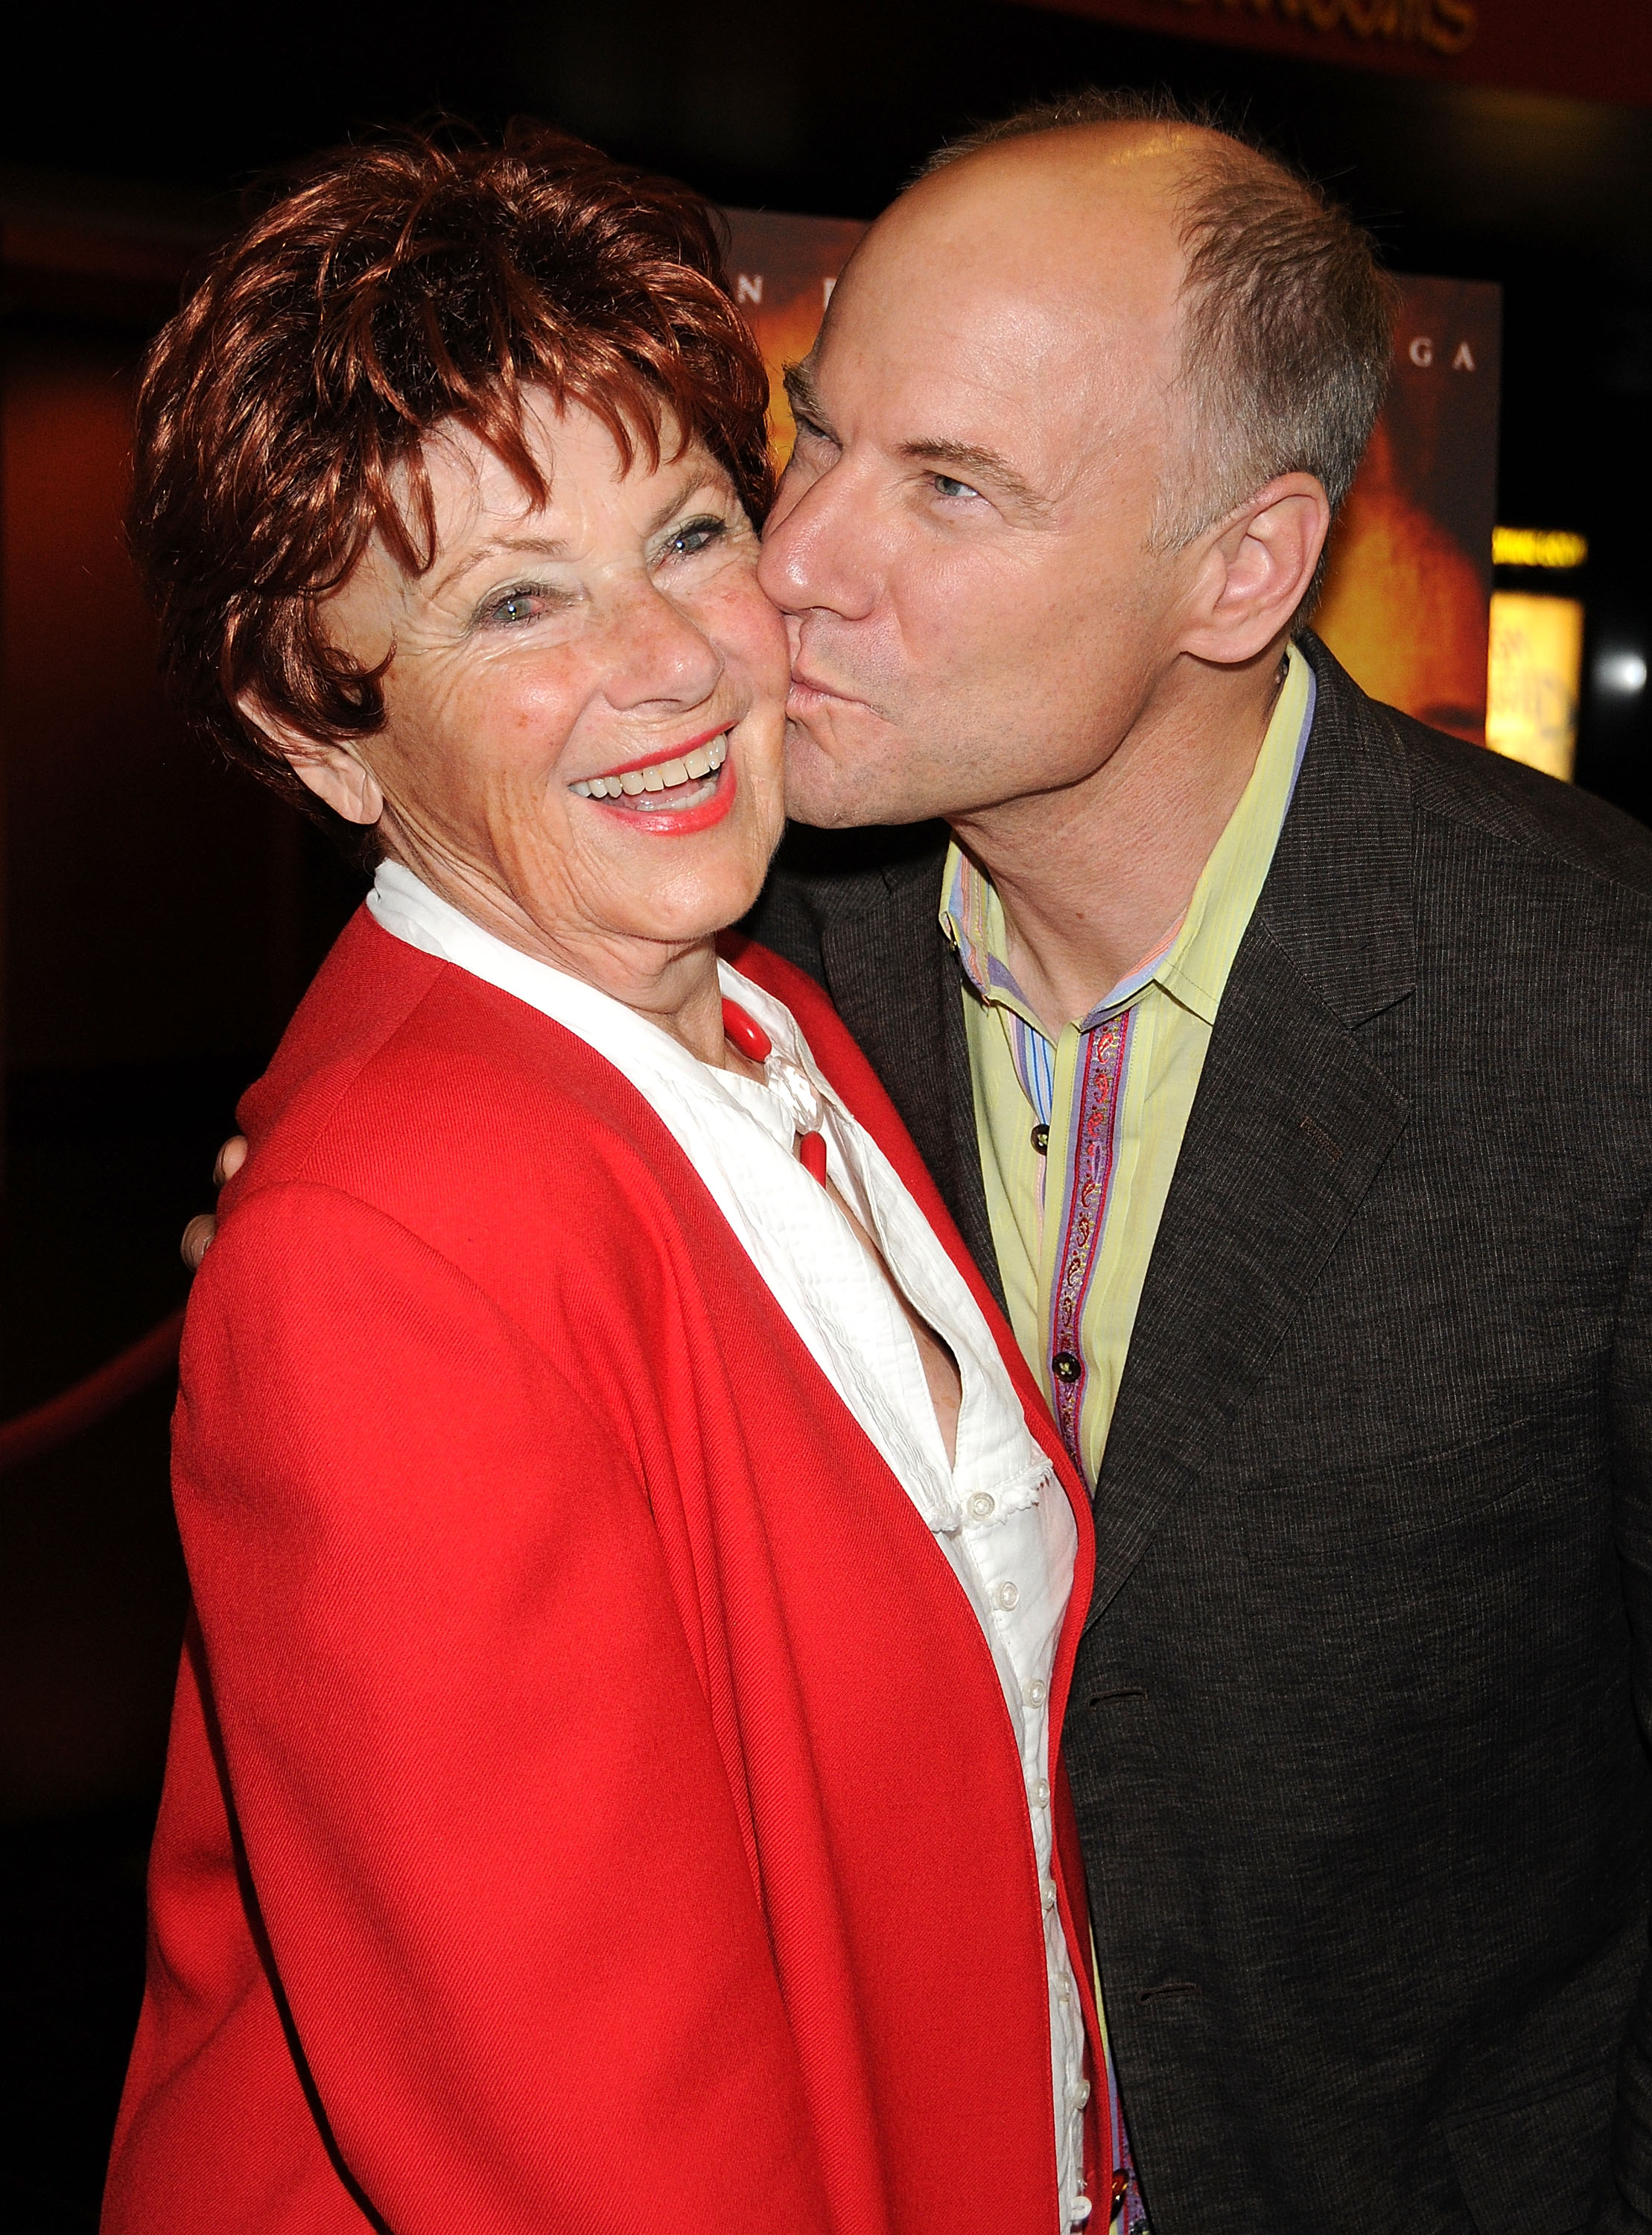 Marion Ross and son Jim Meskimen at the Los Angeles premiere for "Not Forgotten" on May 15, 2009 in Los Angeles, California | Source: Getty Images